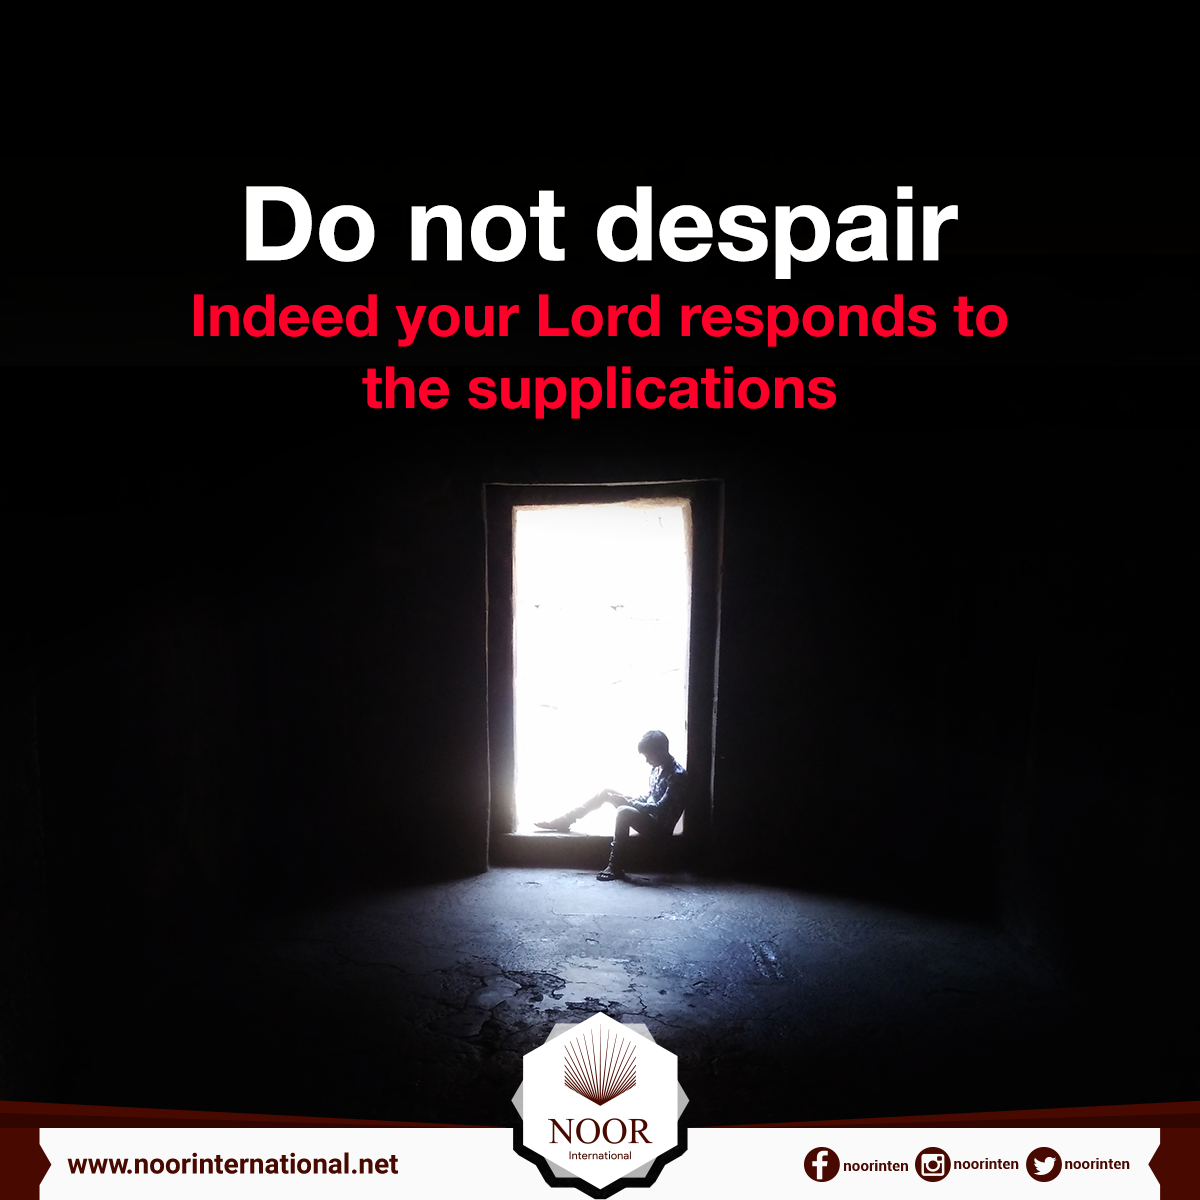 Do not despair. Indeed your Lord responds to the supplications